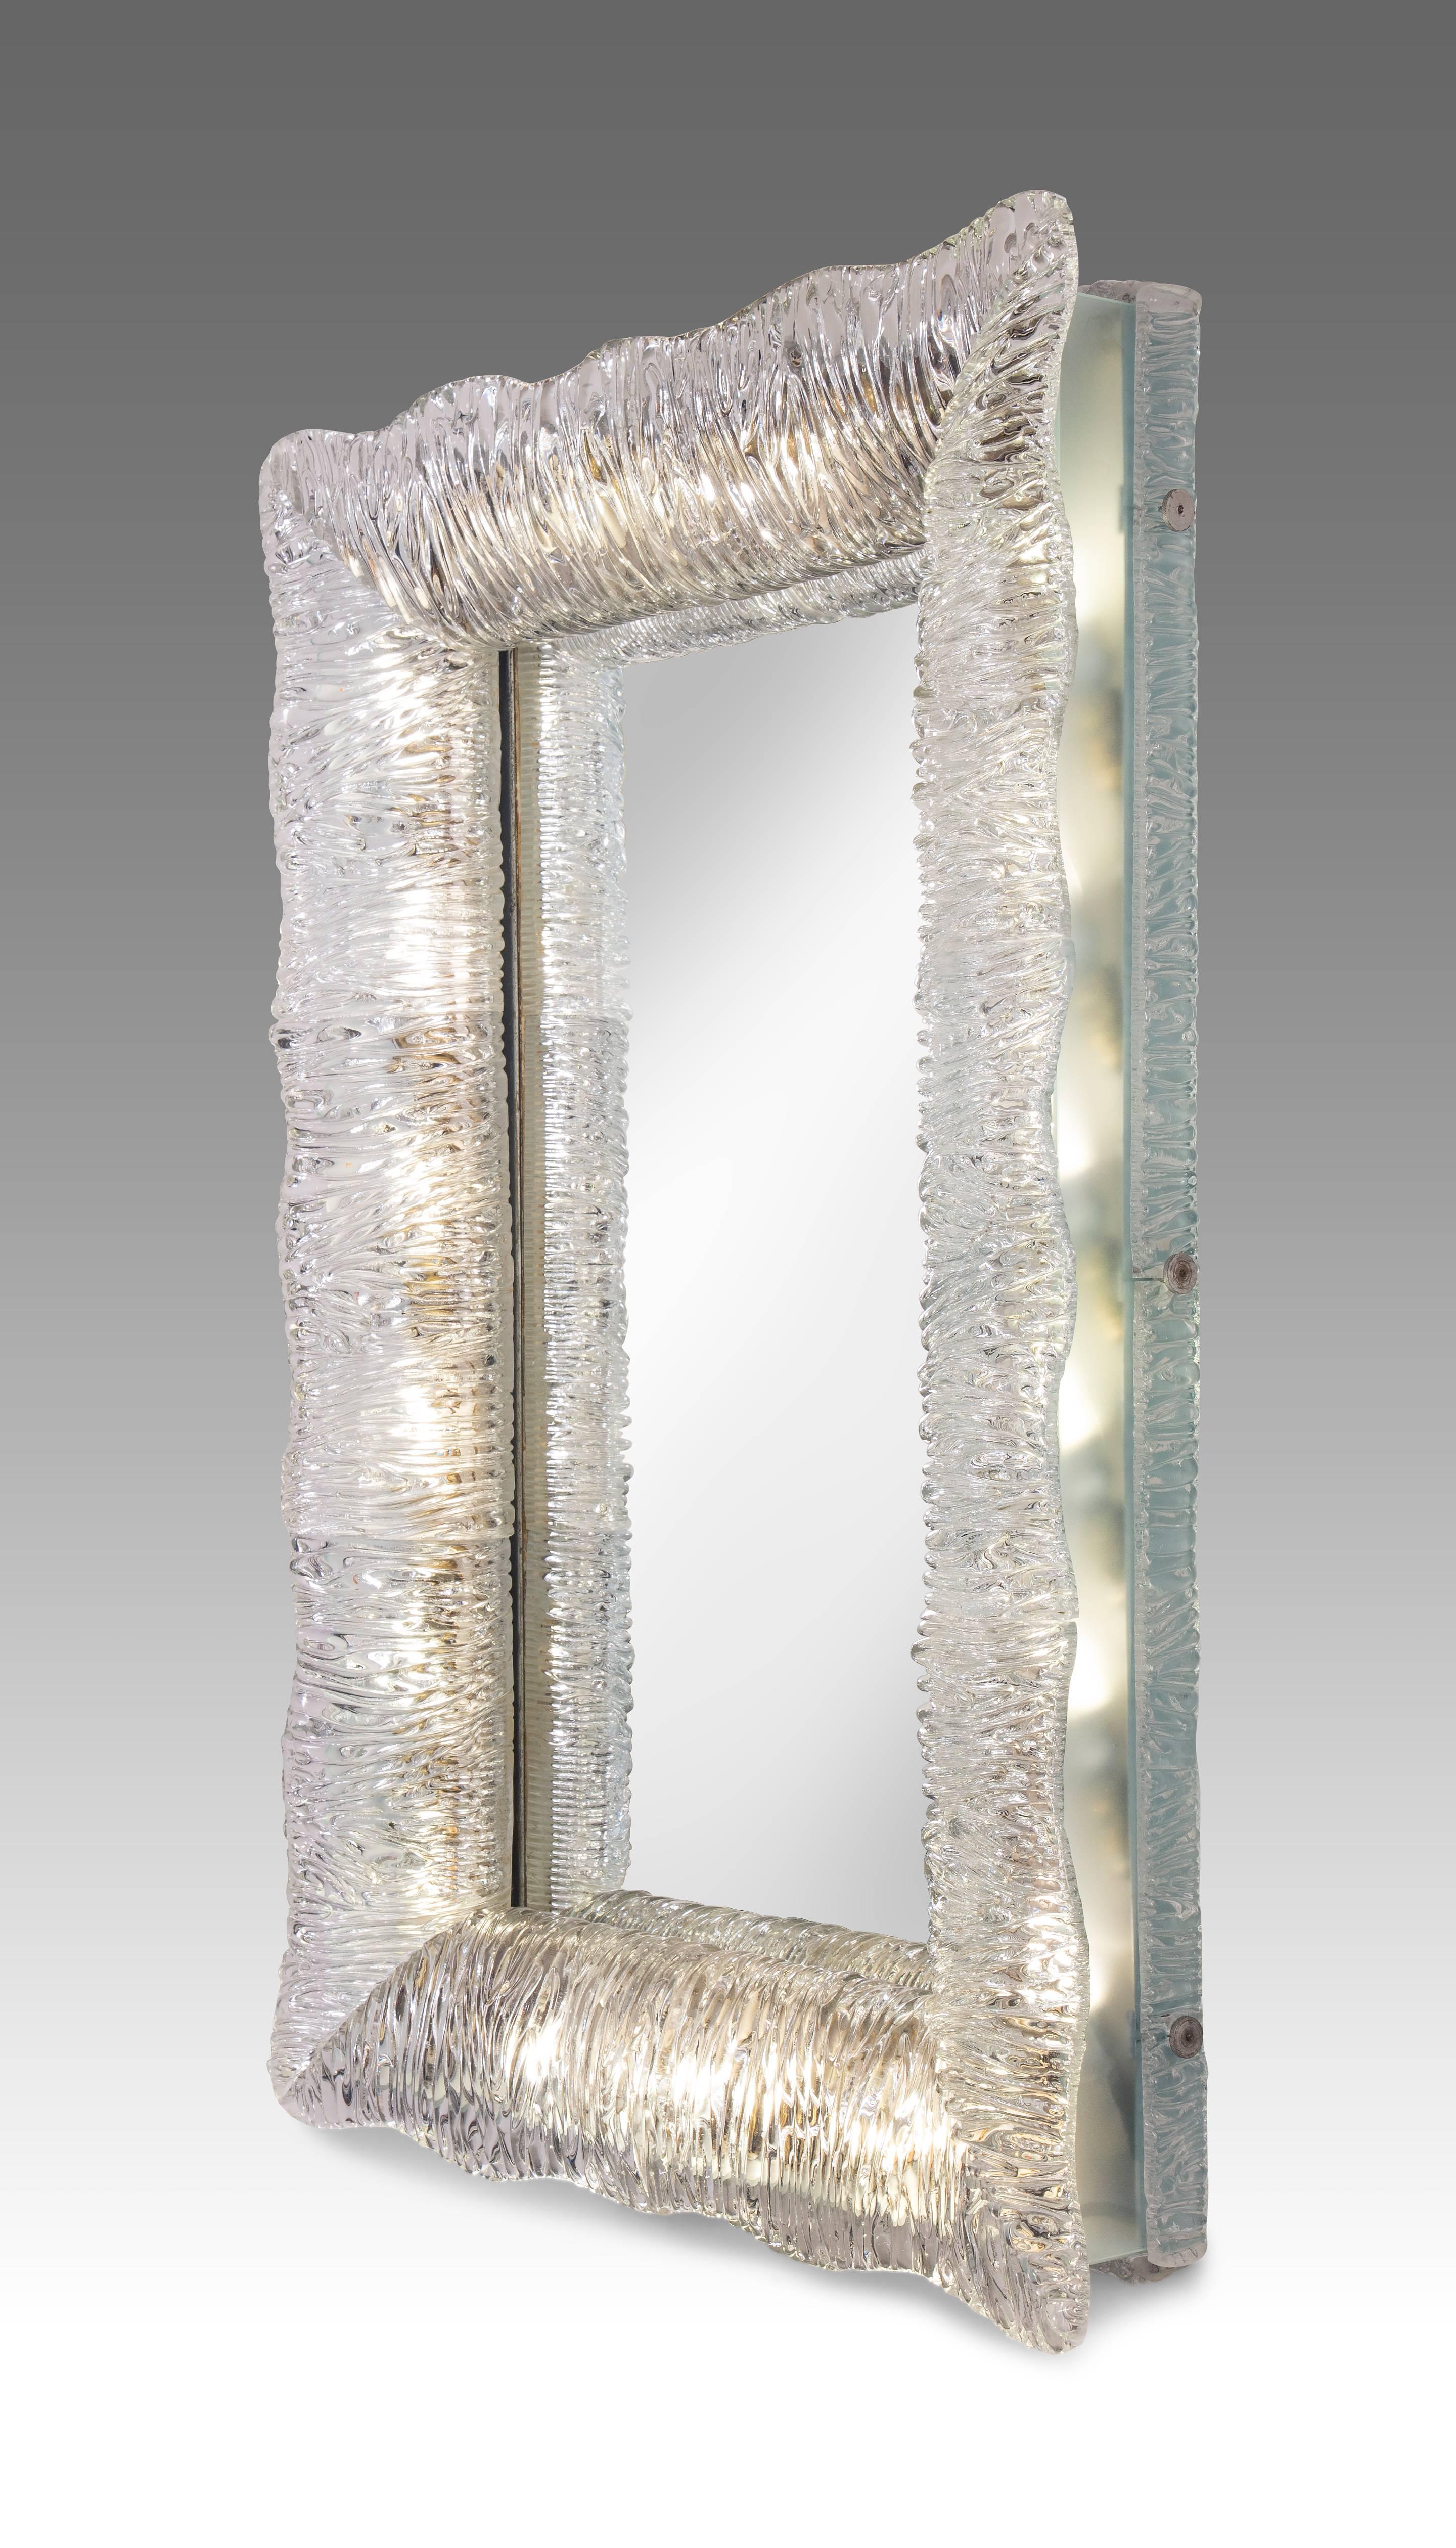 A magnificent rare example of a Venini illuminated glass framed mirror. The rectangular mirror plate within a frame composed of textured glass with undulating edges, softly illuminated by lights concealed by frosted glass side panels. Original